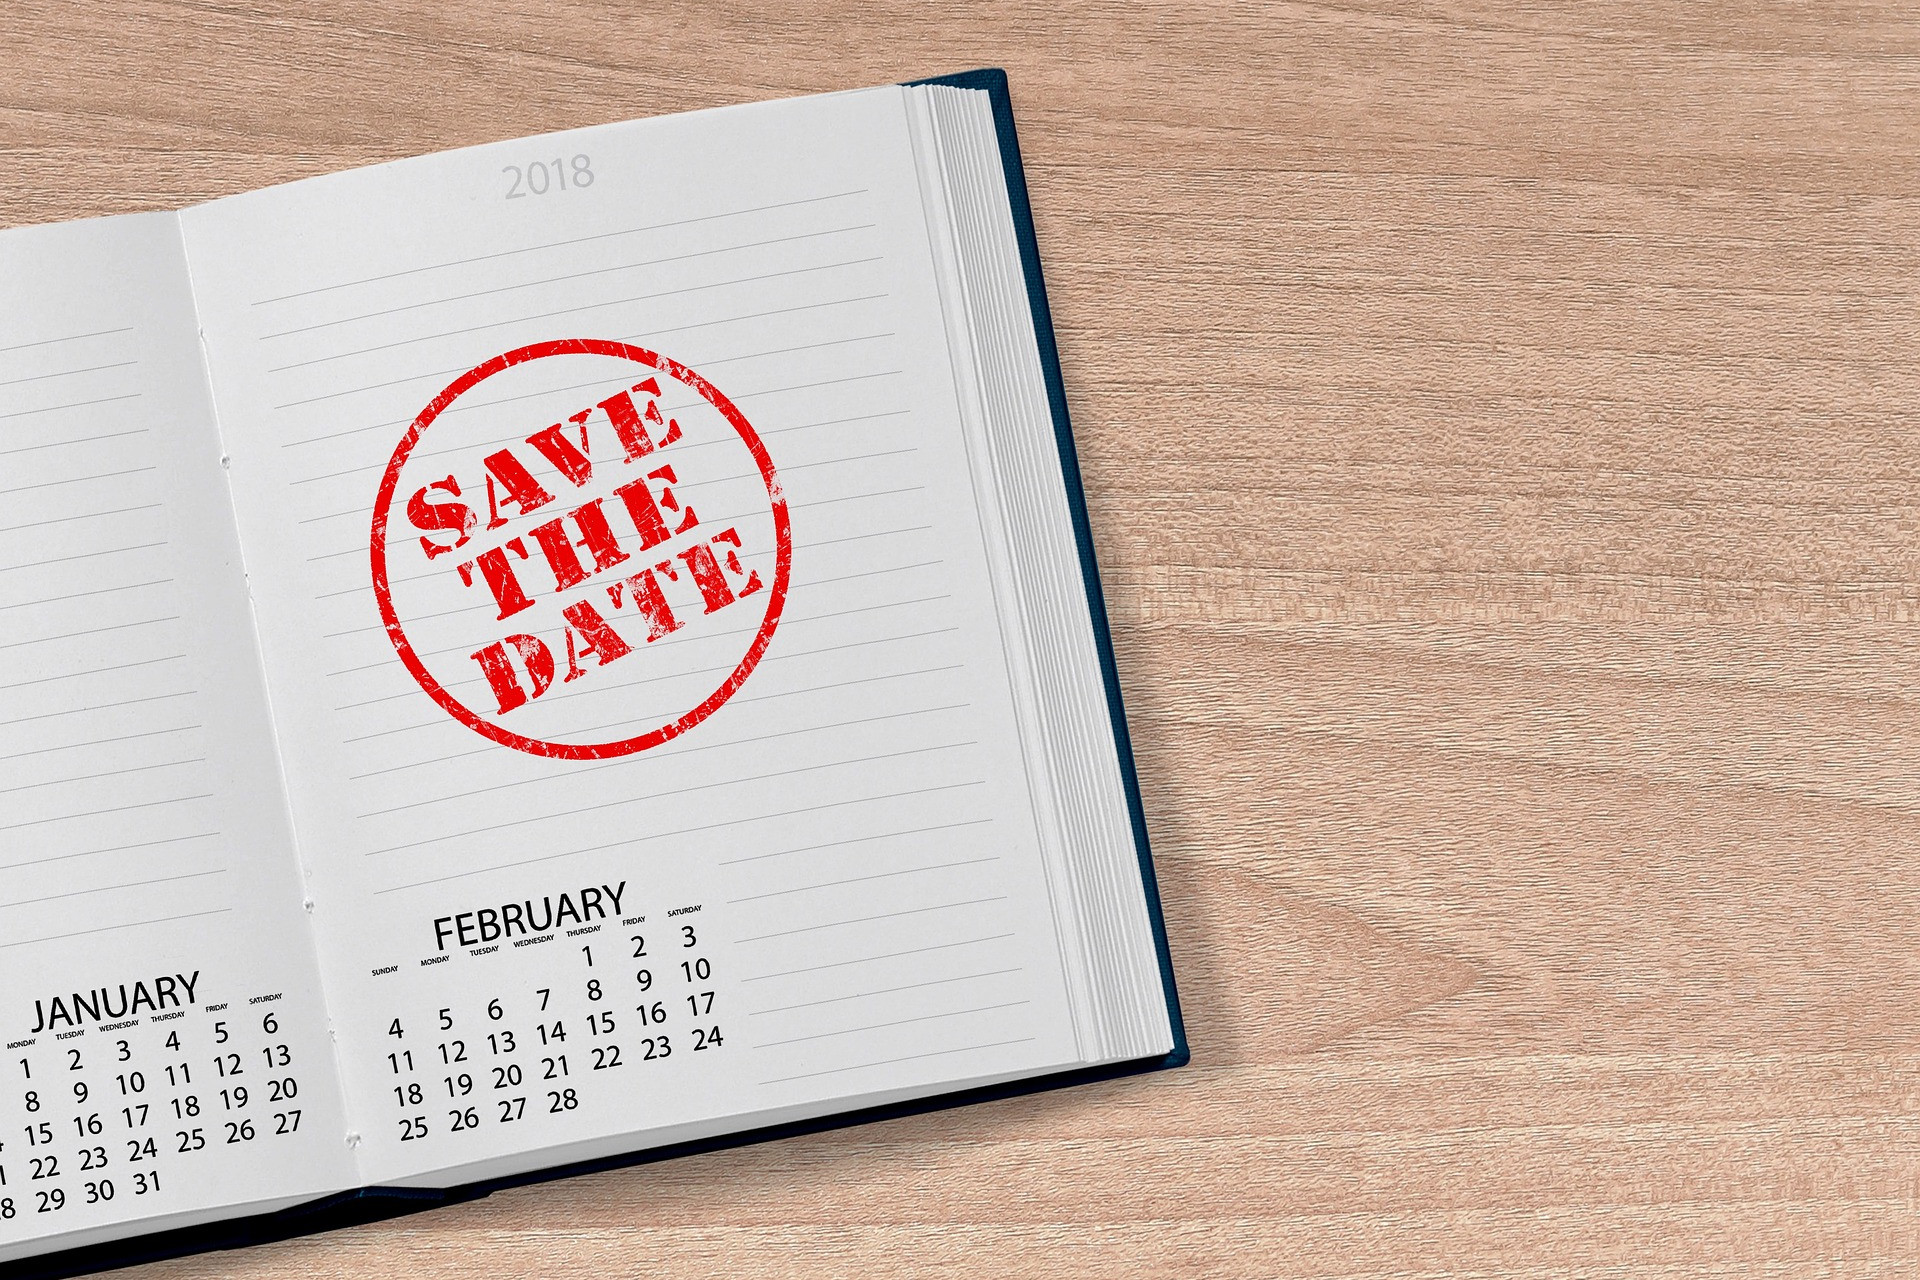 Save the Date ©Image from Pixabay